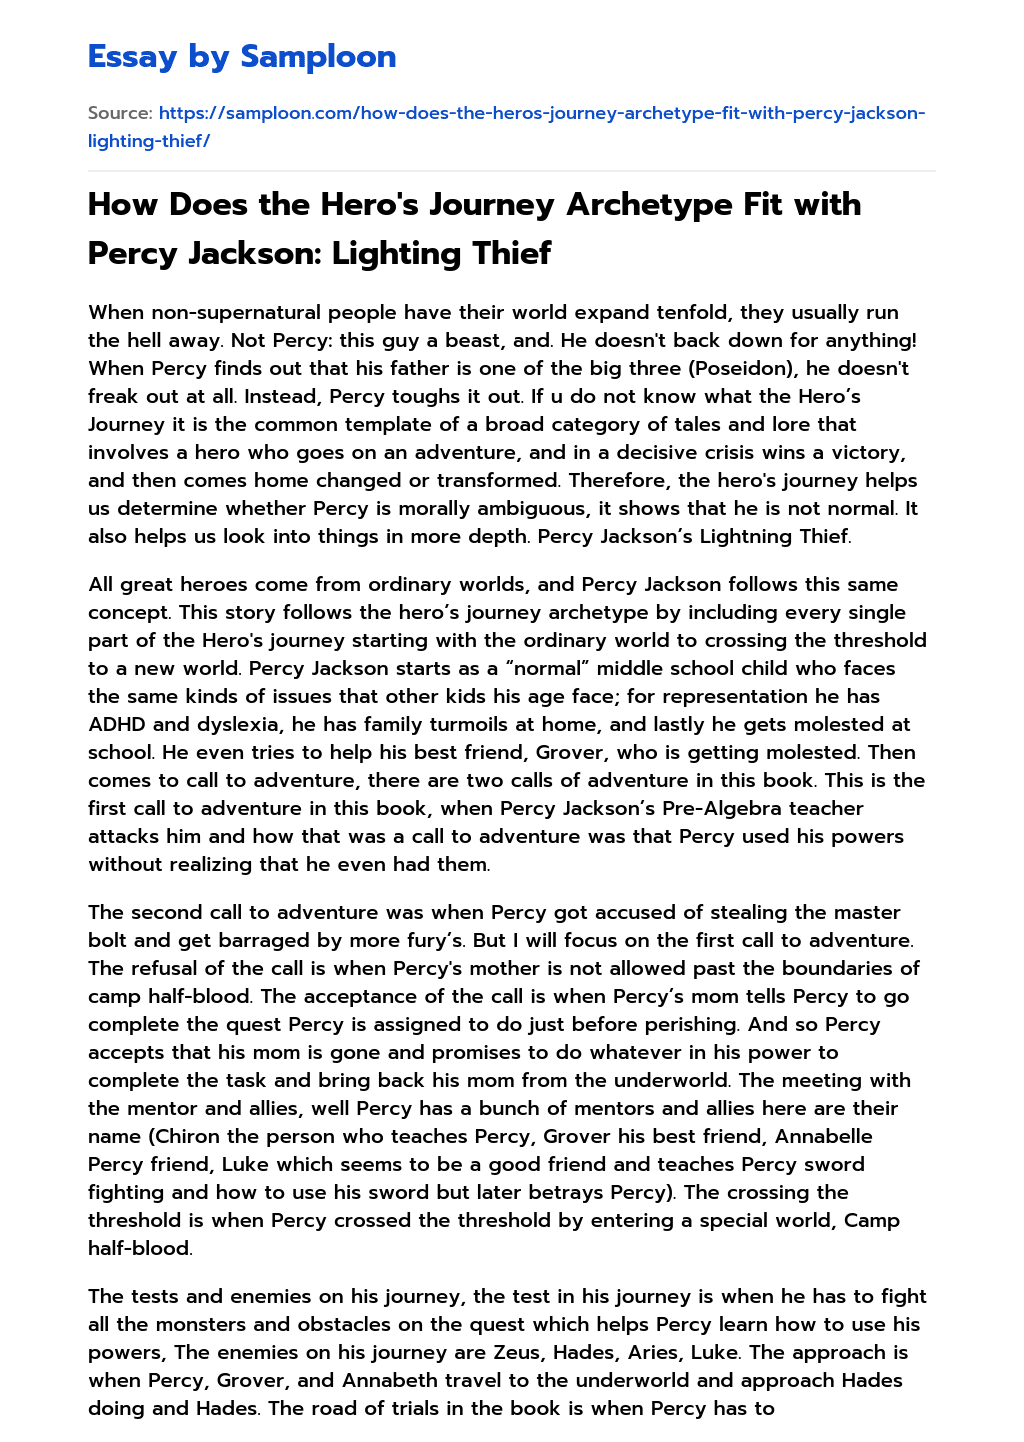 How Does the Hero’s Journey Archetype Fit with Percy Jackson: Lighting Thief essay